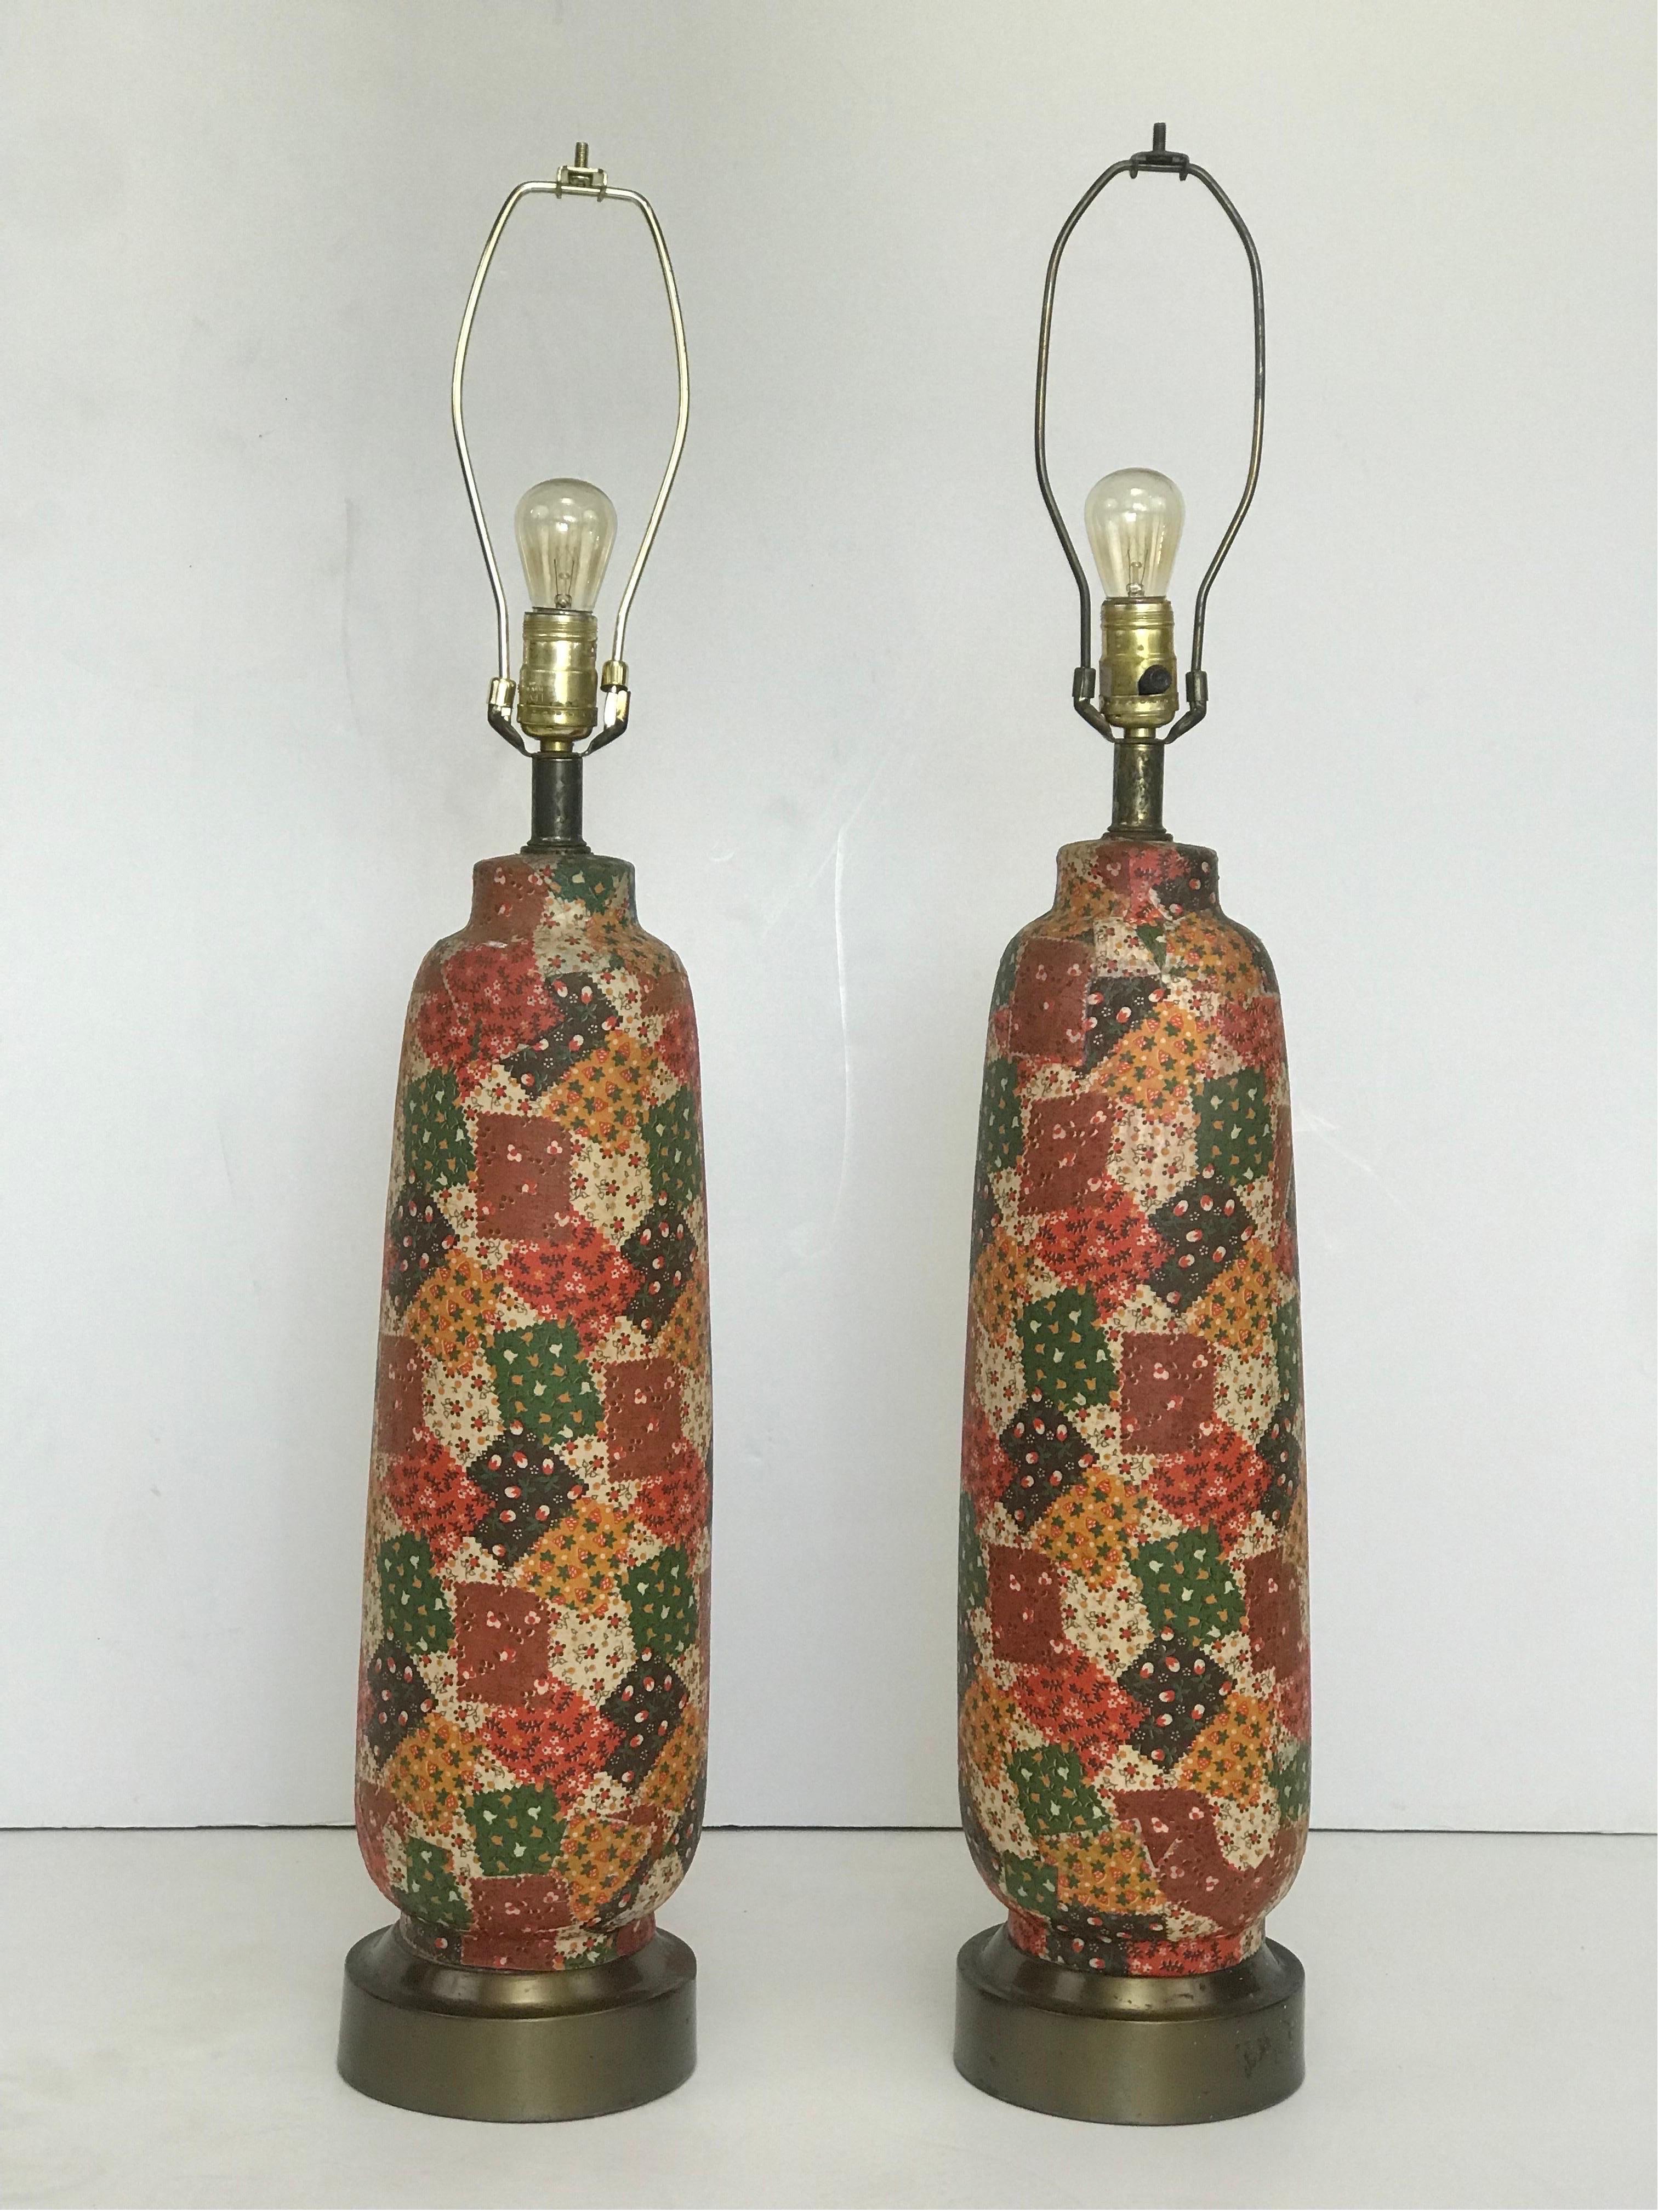 A Pair of 1970’s Spun Metal Table Lamps in a Printed Patchwork Theme Finish  For Sale 8